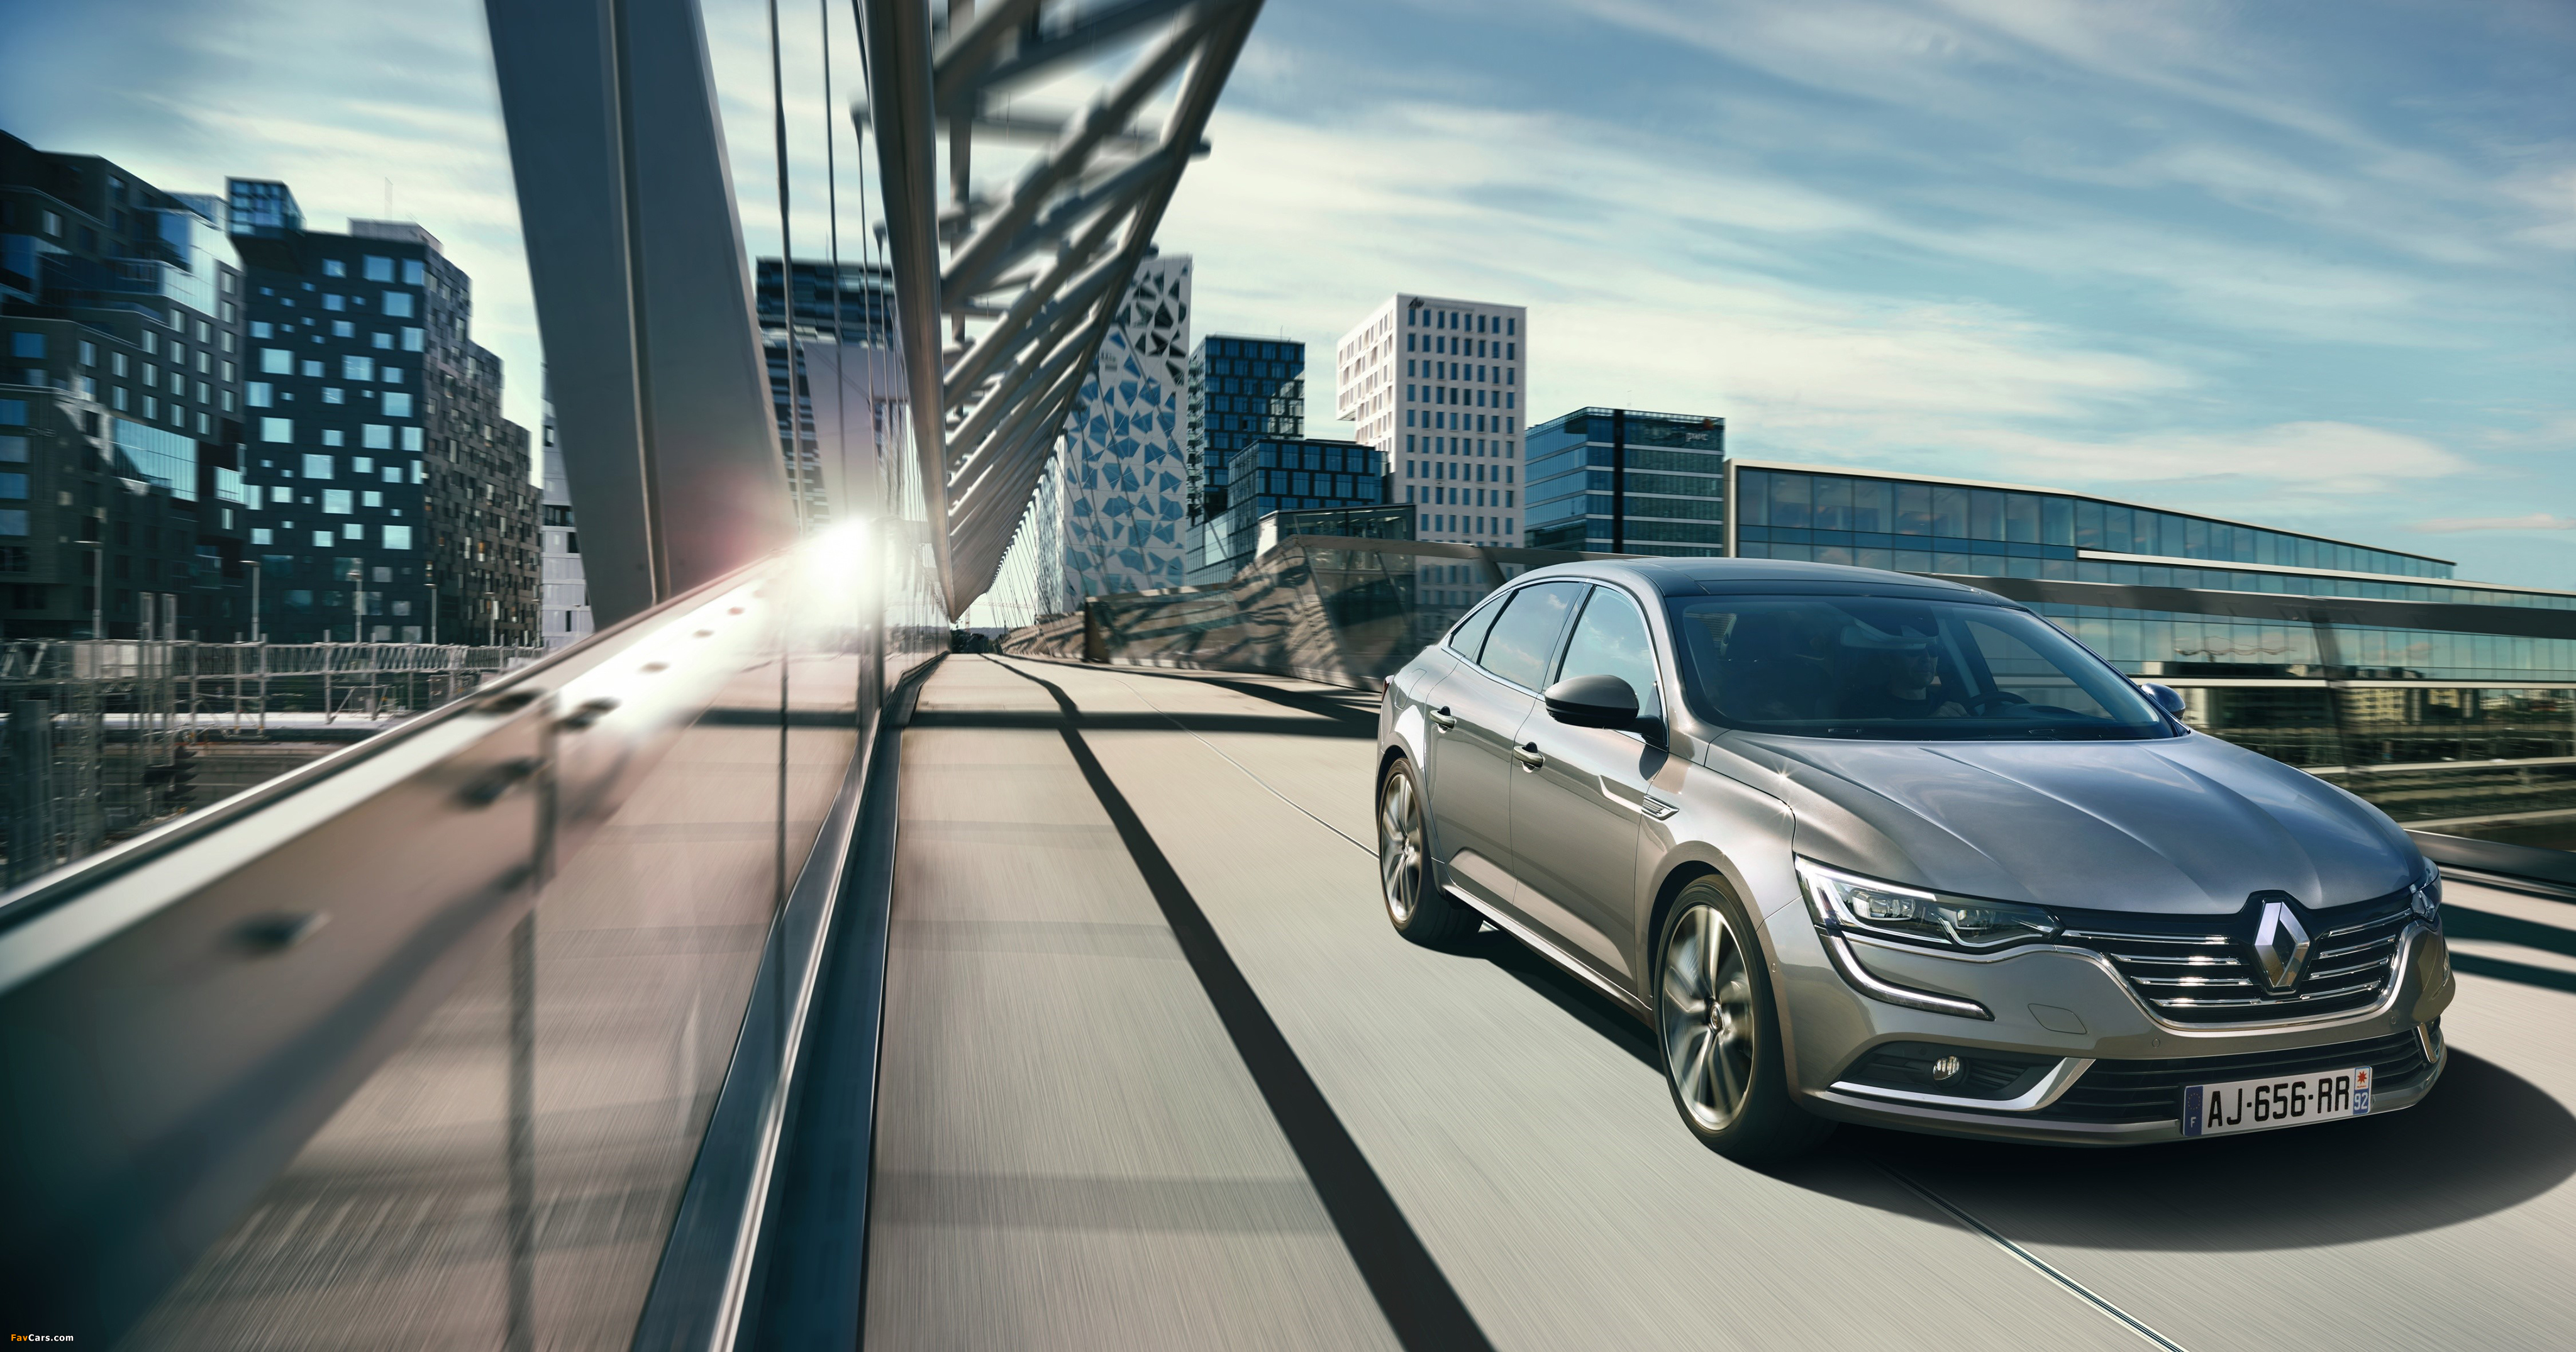 Renault Talisman hd specifications